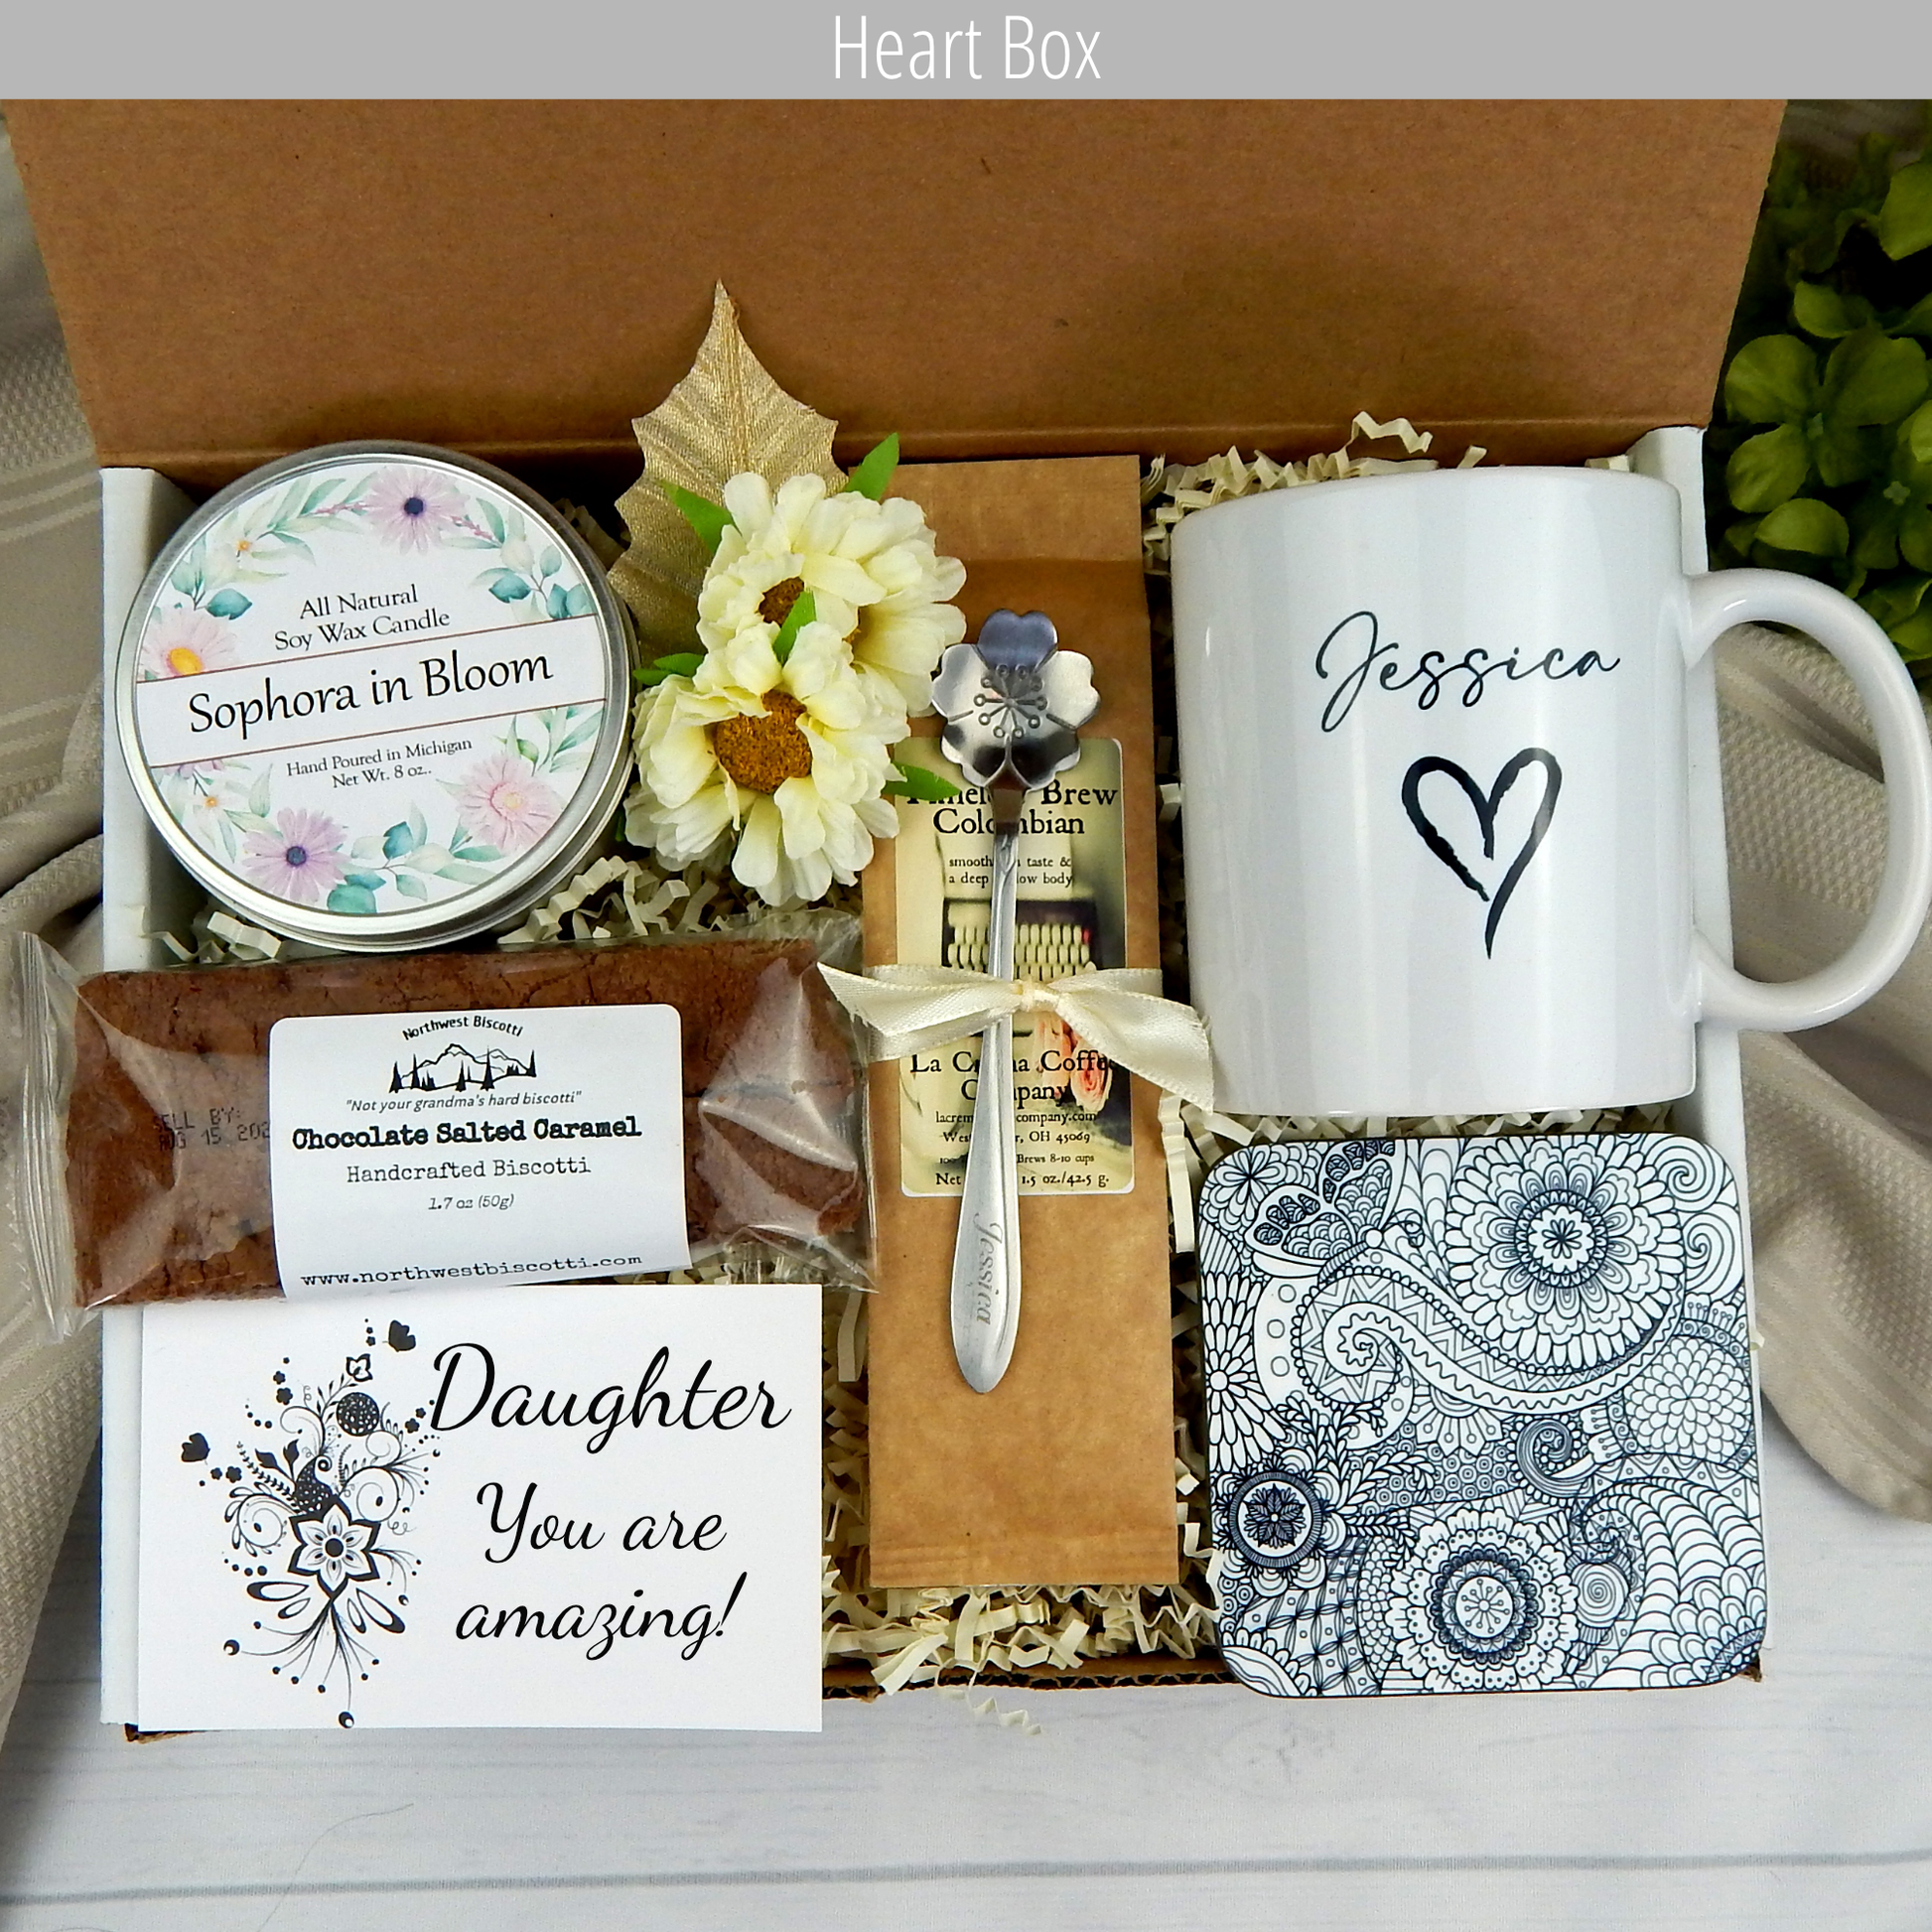 Daughter's joyous occasions: Women's gift basket featuring a personalized name mug, candle, engraved spoon, biscotti, and coffee.